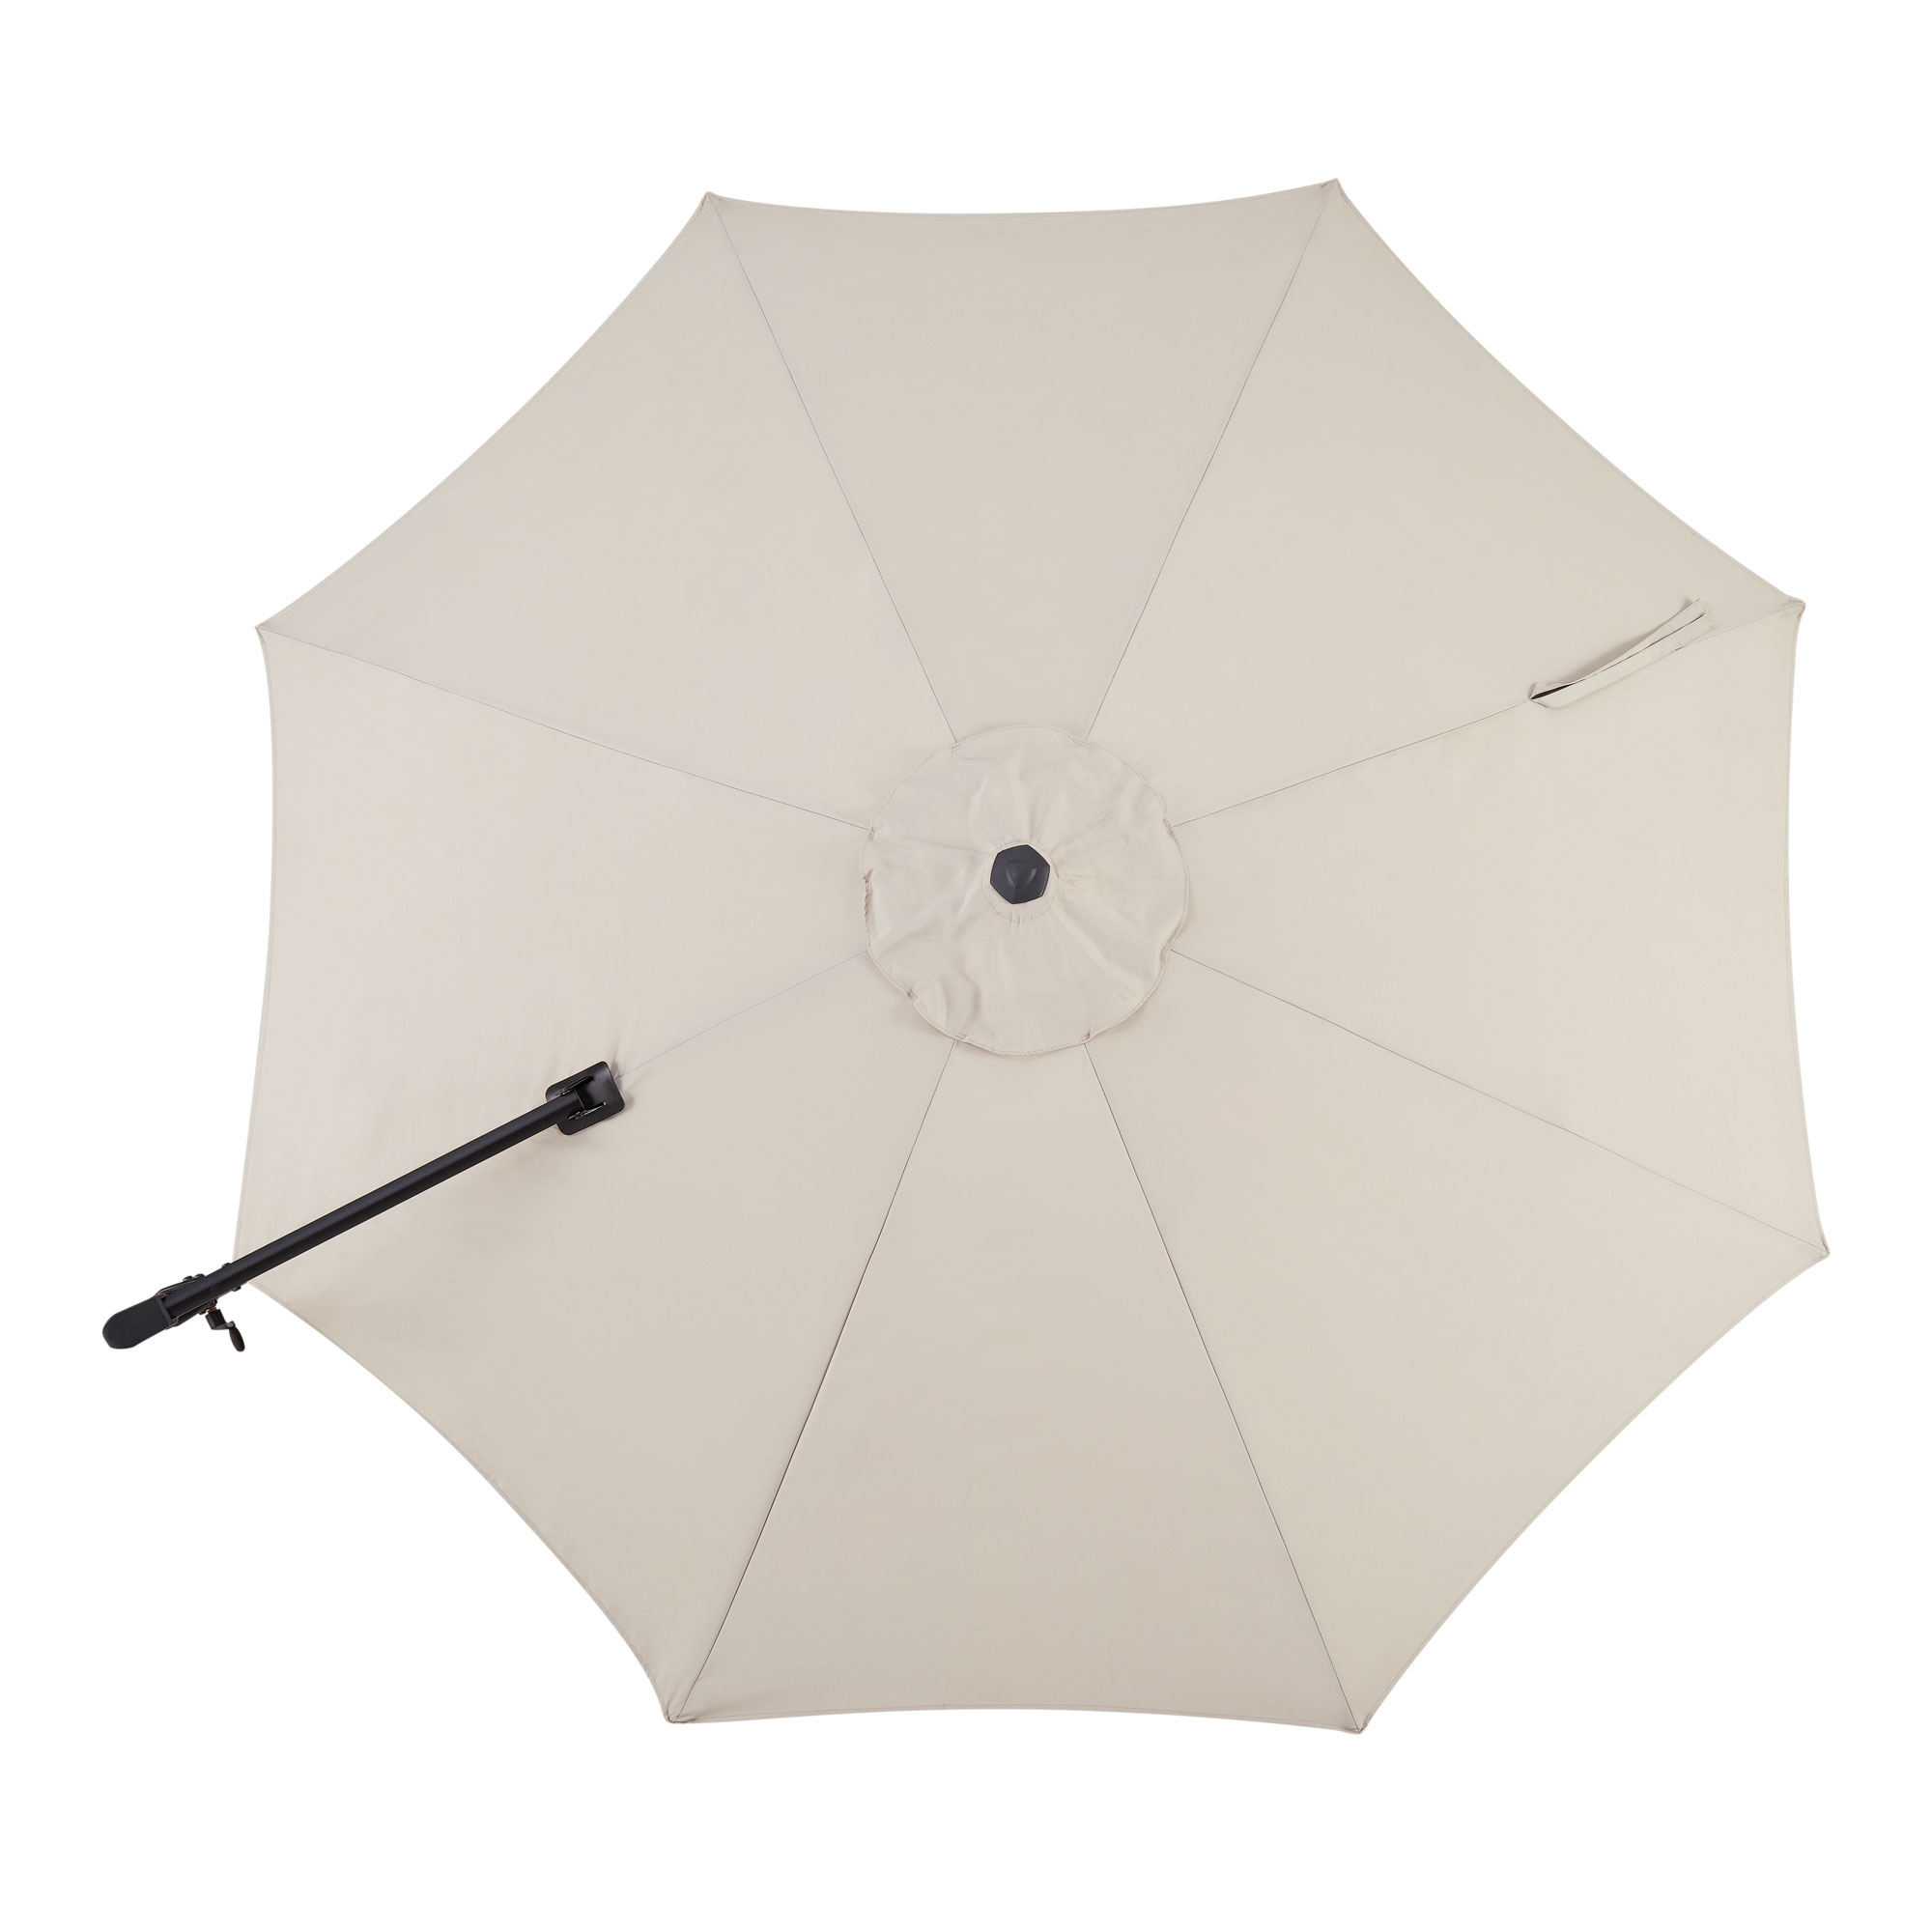 Mainstays Outdoor 10' Round Offset Tilt Patio Umbrella and Base, Stone - image 3 of 8